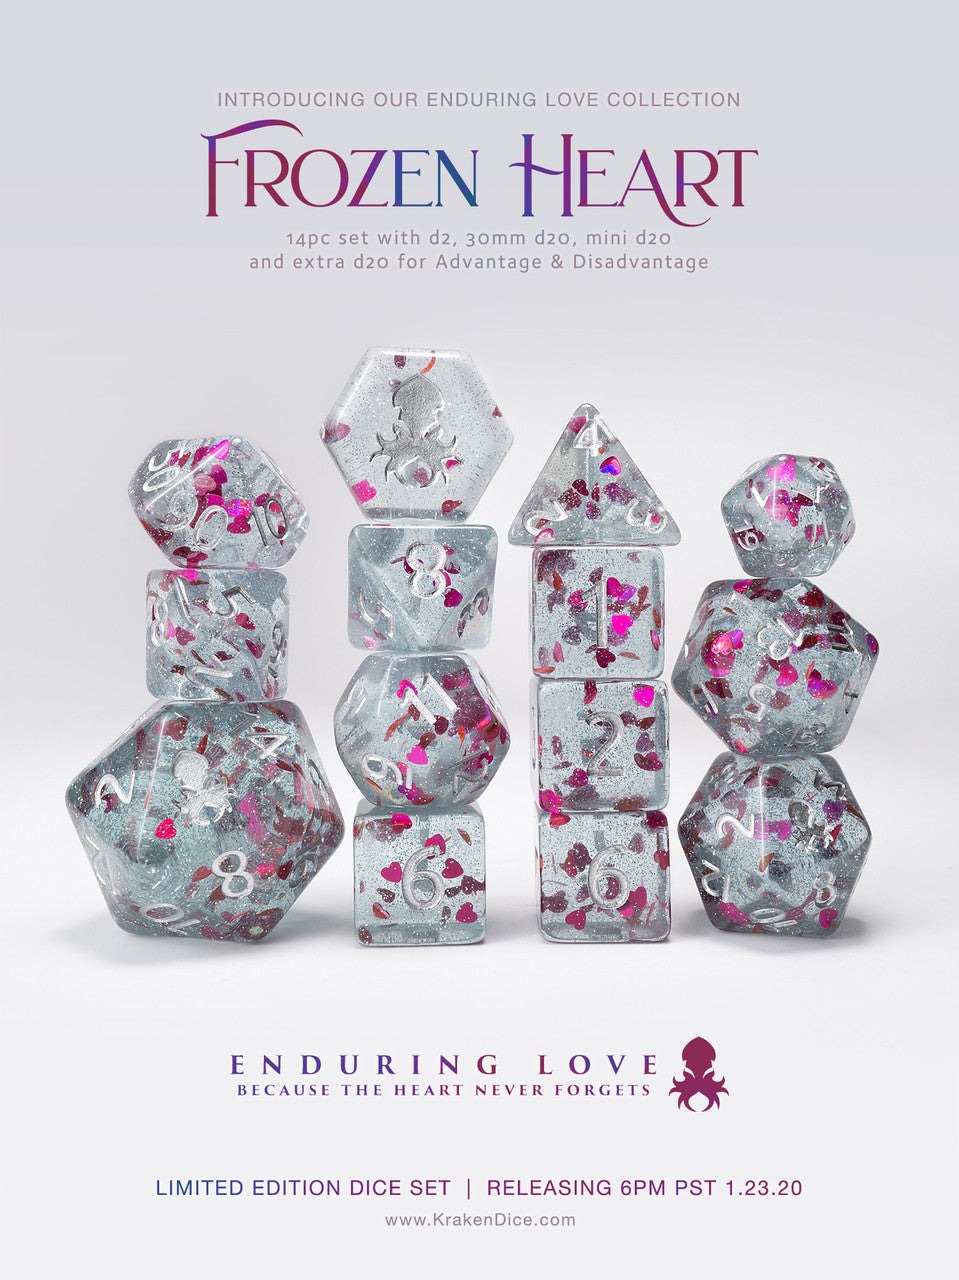 Frozen Heart - Blue with Red Hearts 14pc Limited Edition Dice Set